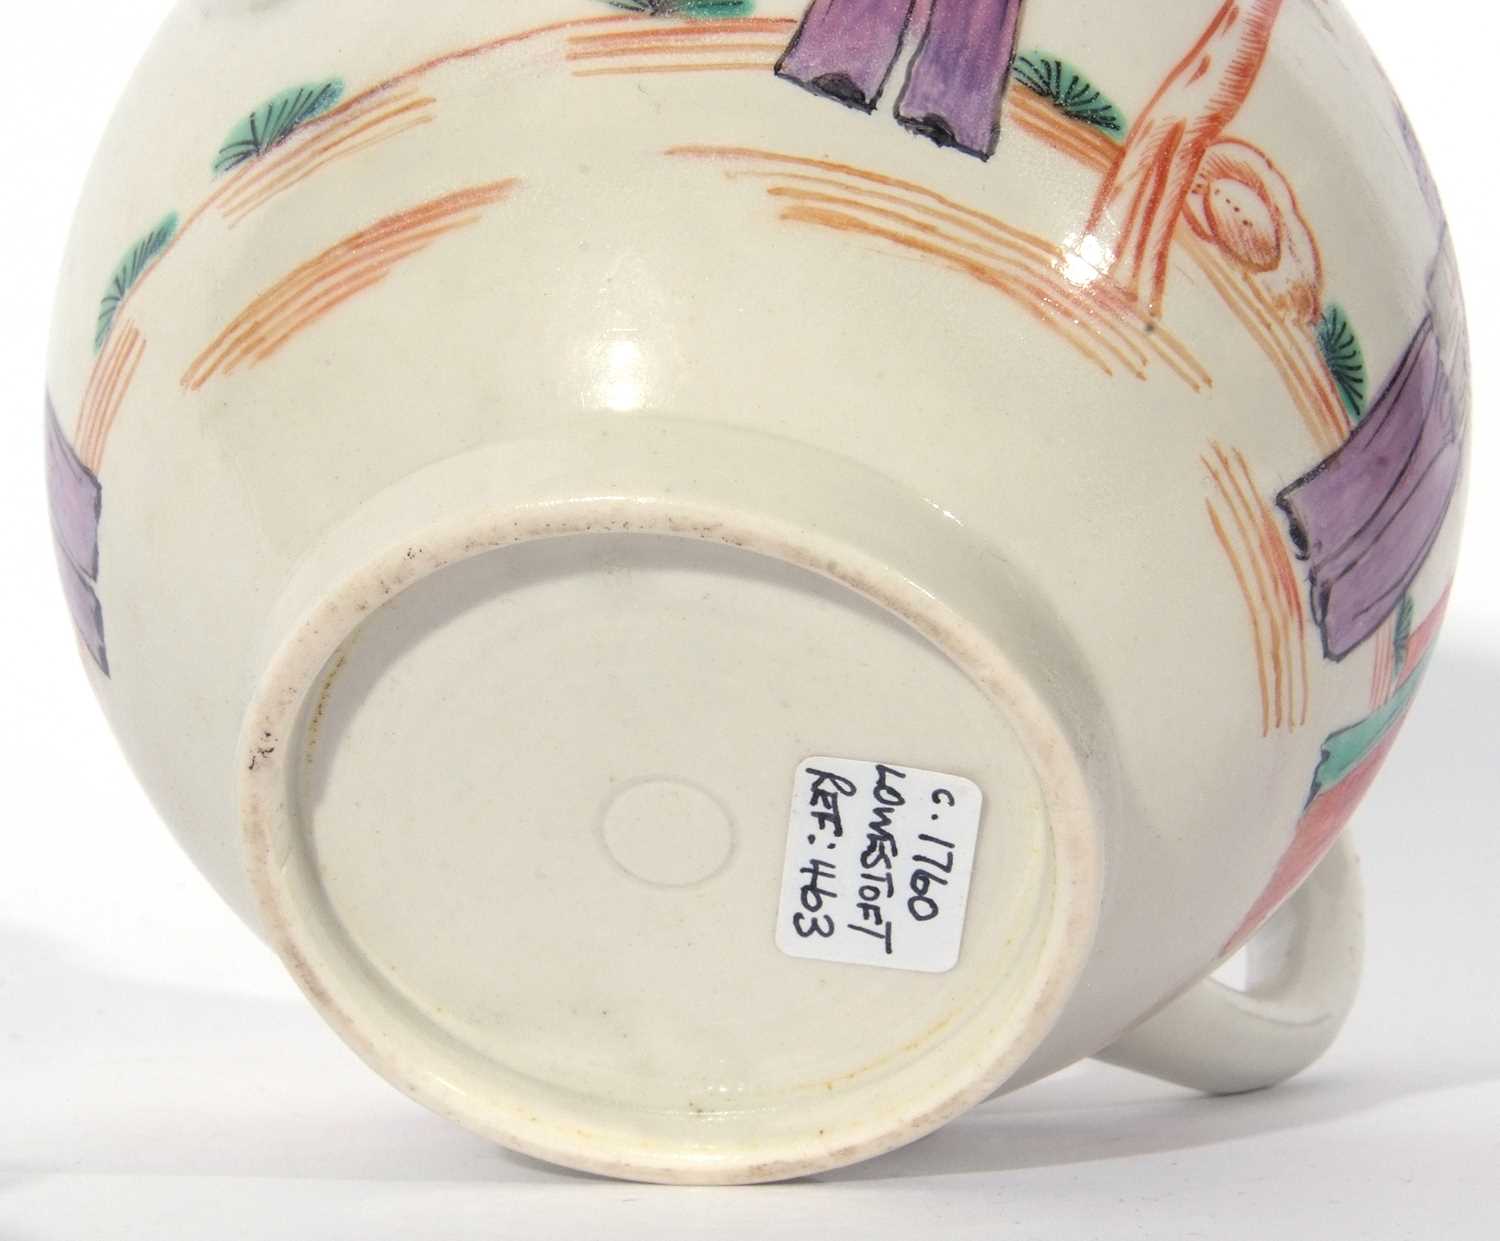 Lowestoft porcelain tea pot, circa 1780, with a polychrome design of Chinese figures by a tree, - Image 6 of 8